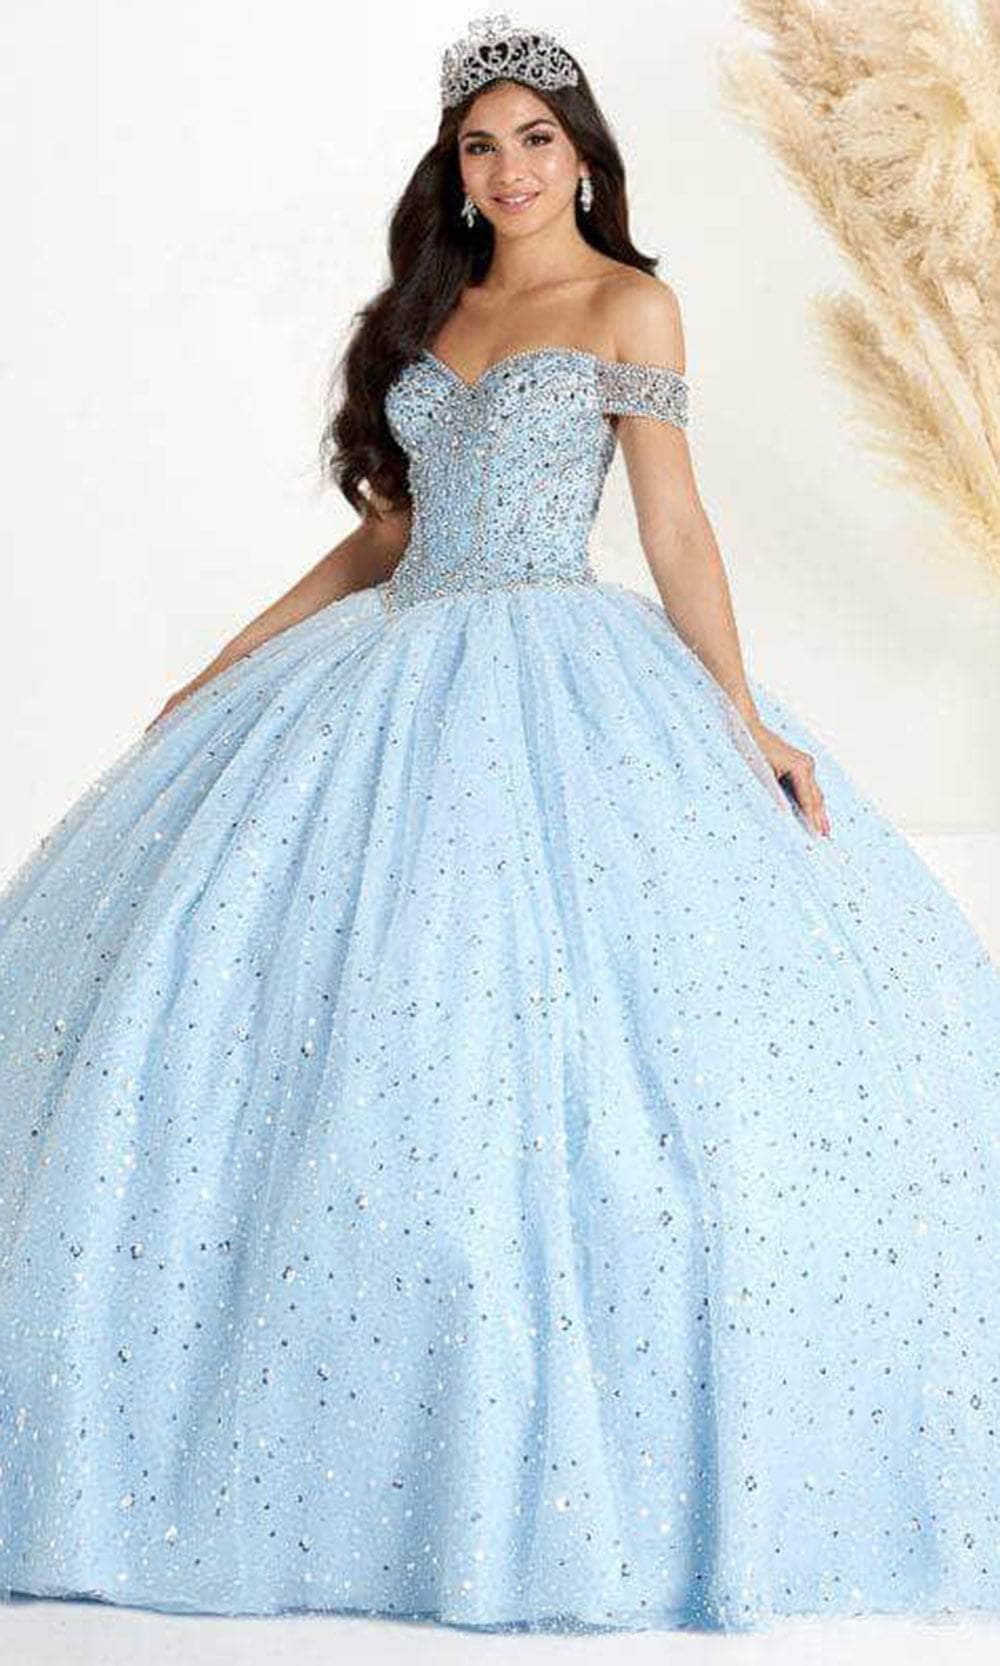 Fiesta Gowns 56452 - Shimmering Off-shoulder Ballgown Special Occasion Dress